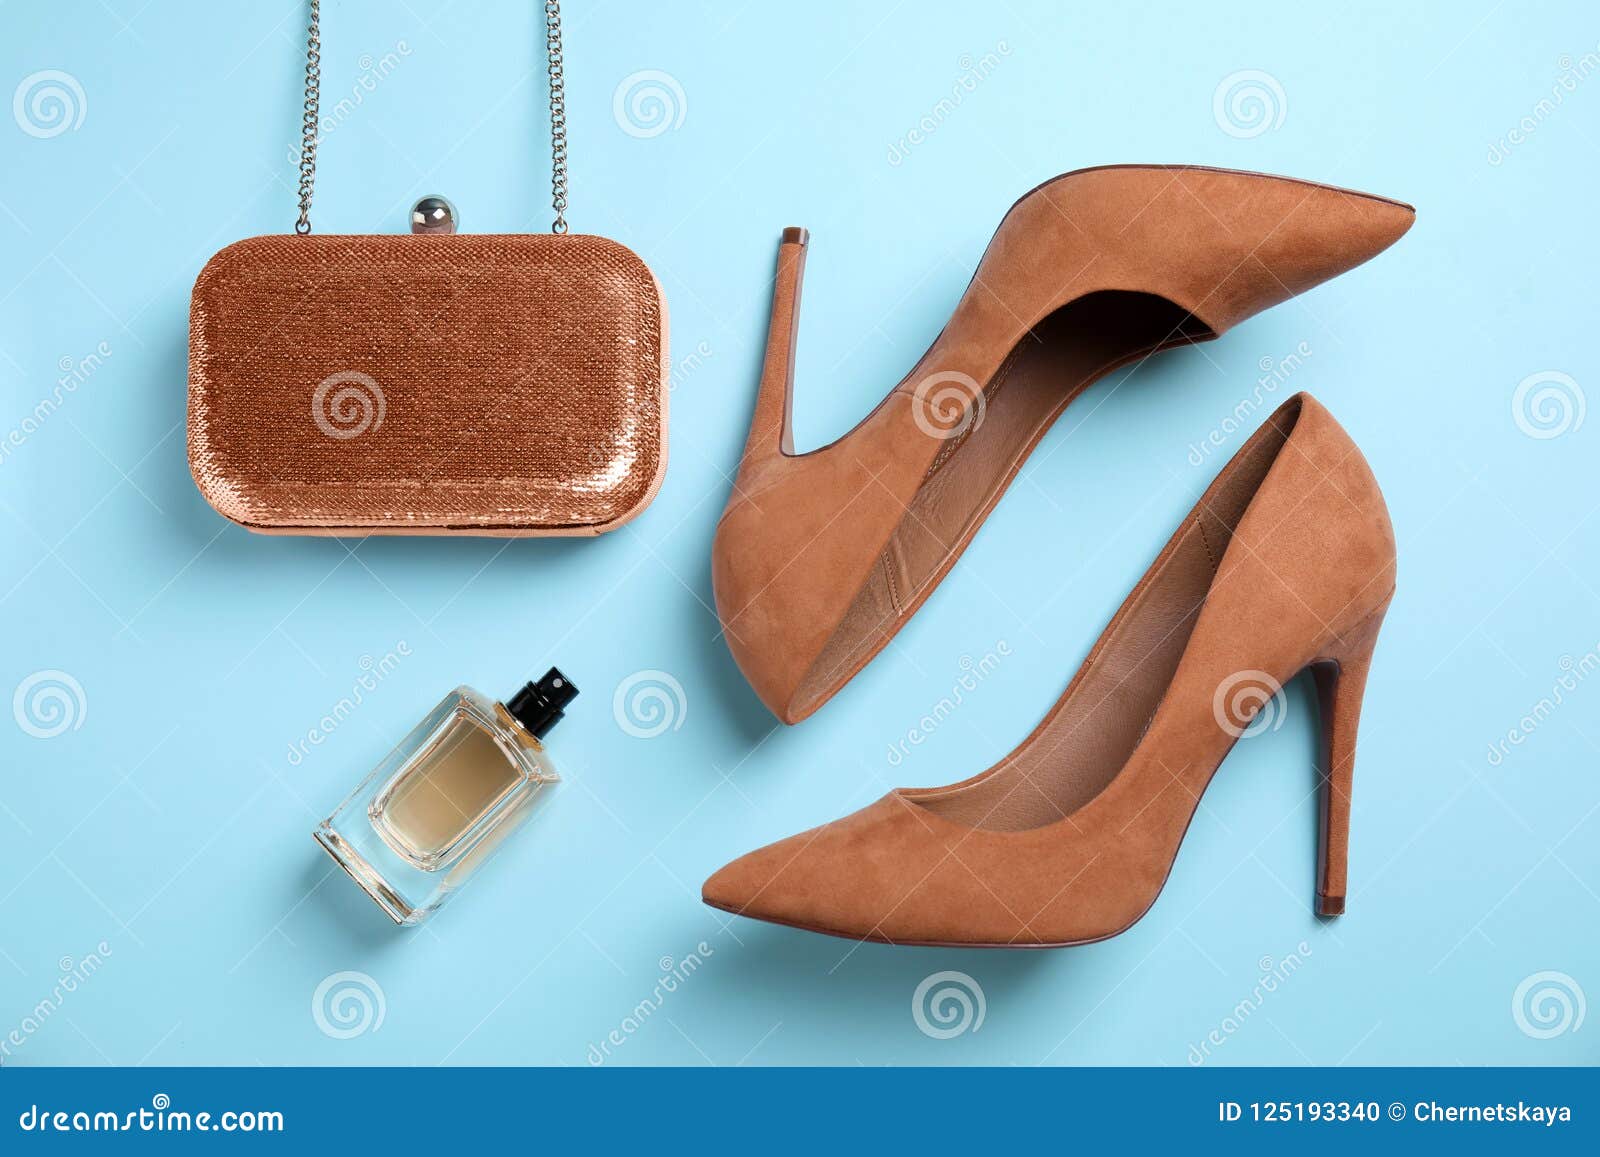 Beautiful Shoes, Bottle of Perfume and Small Bag Stock Photo - Image of ...